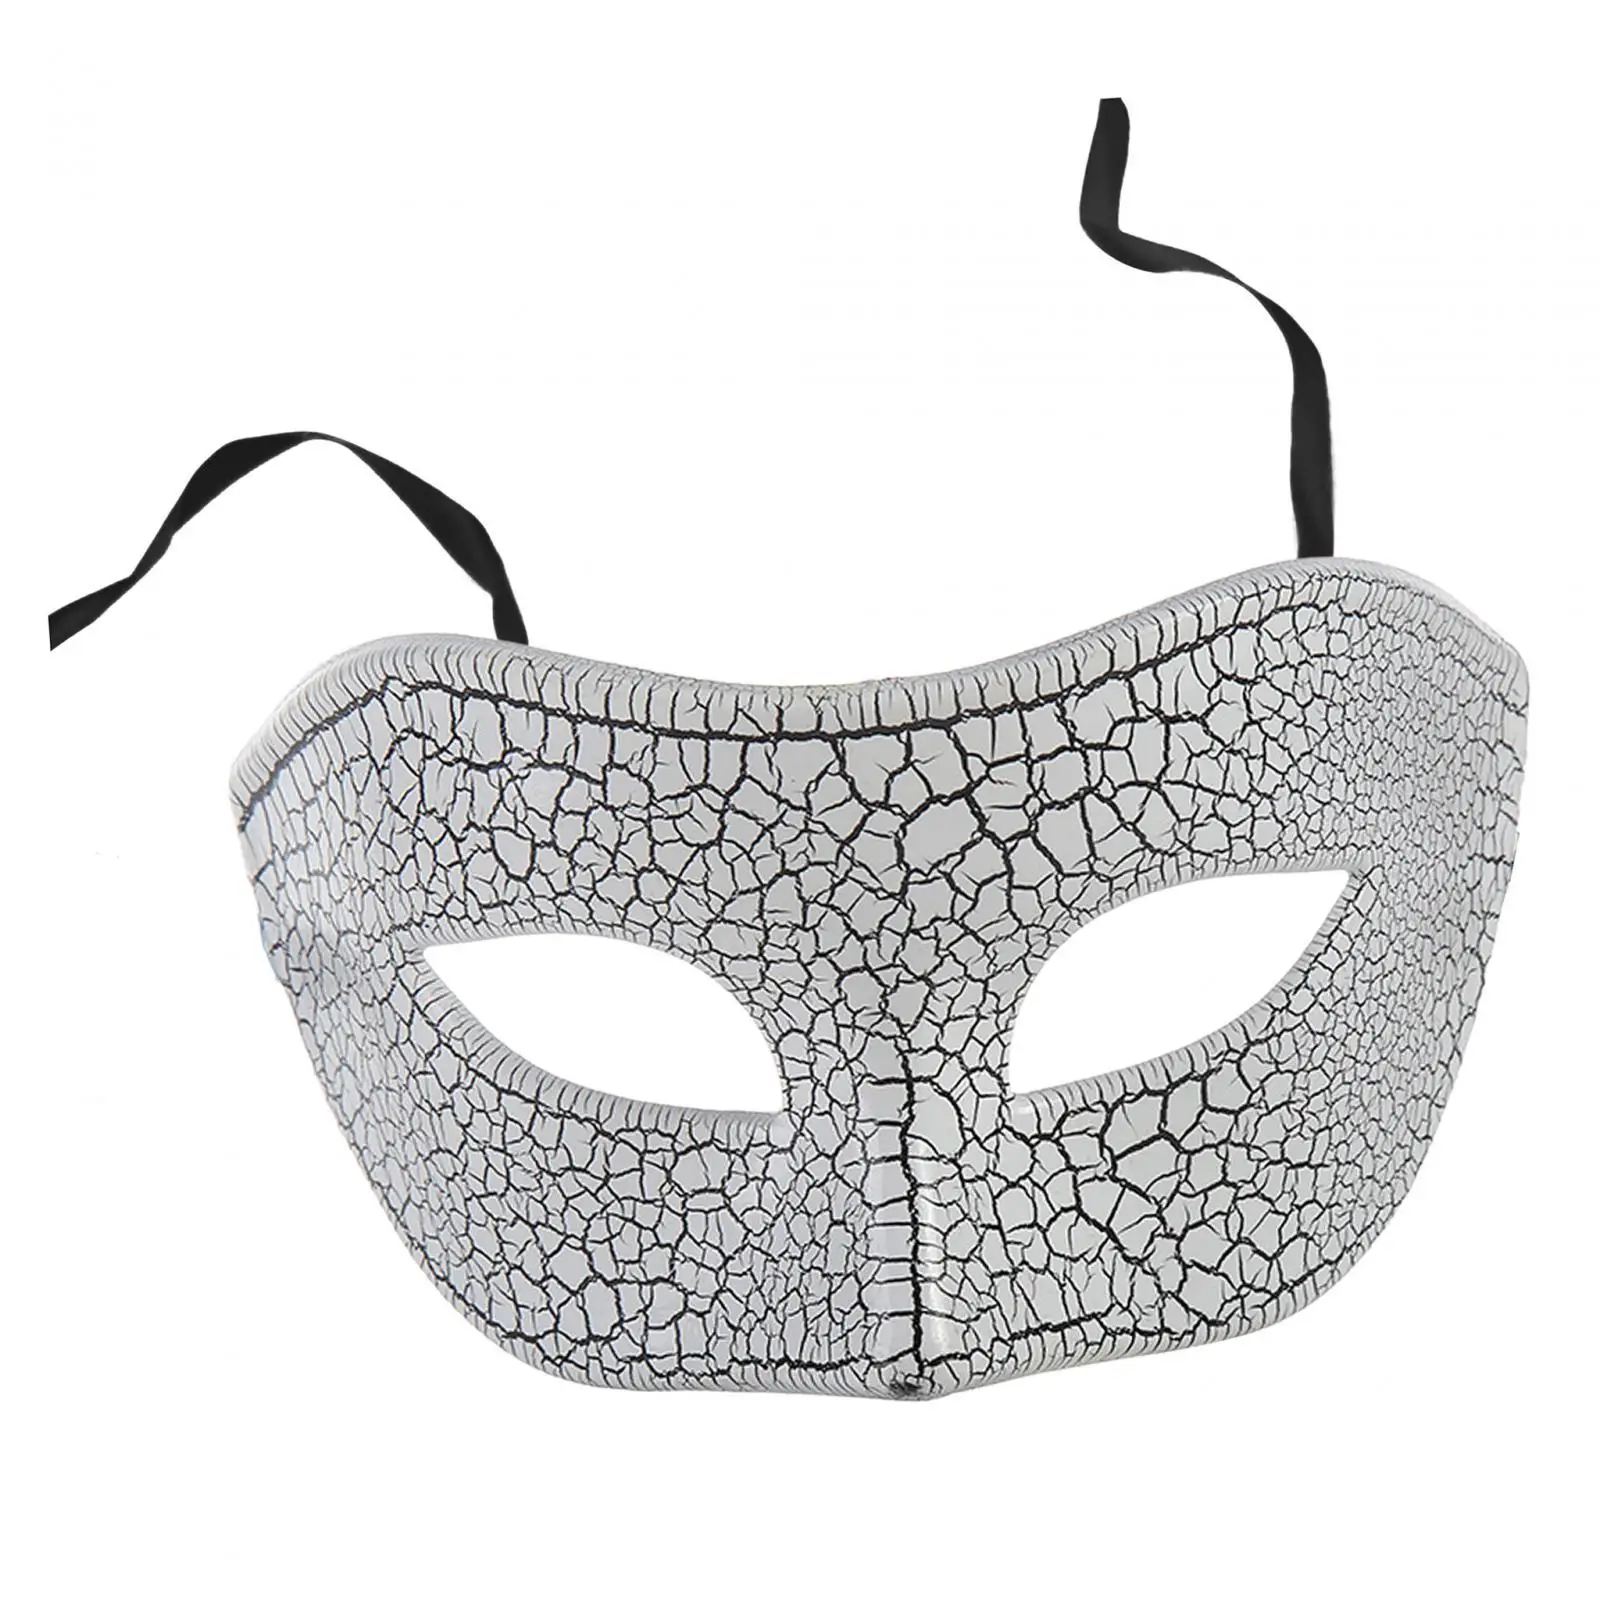 Masquerade Mask Costume Accessories Halloween Decor Party Supplies Mardi Gras Stage Performance Show Carnival Half Face Mask